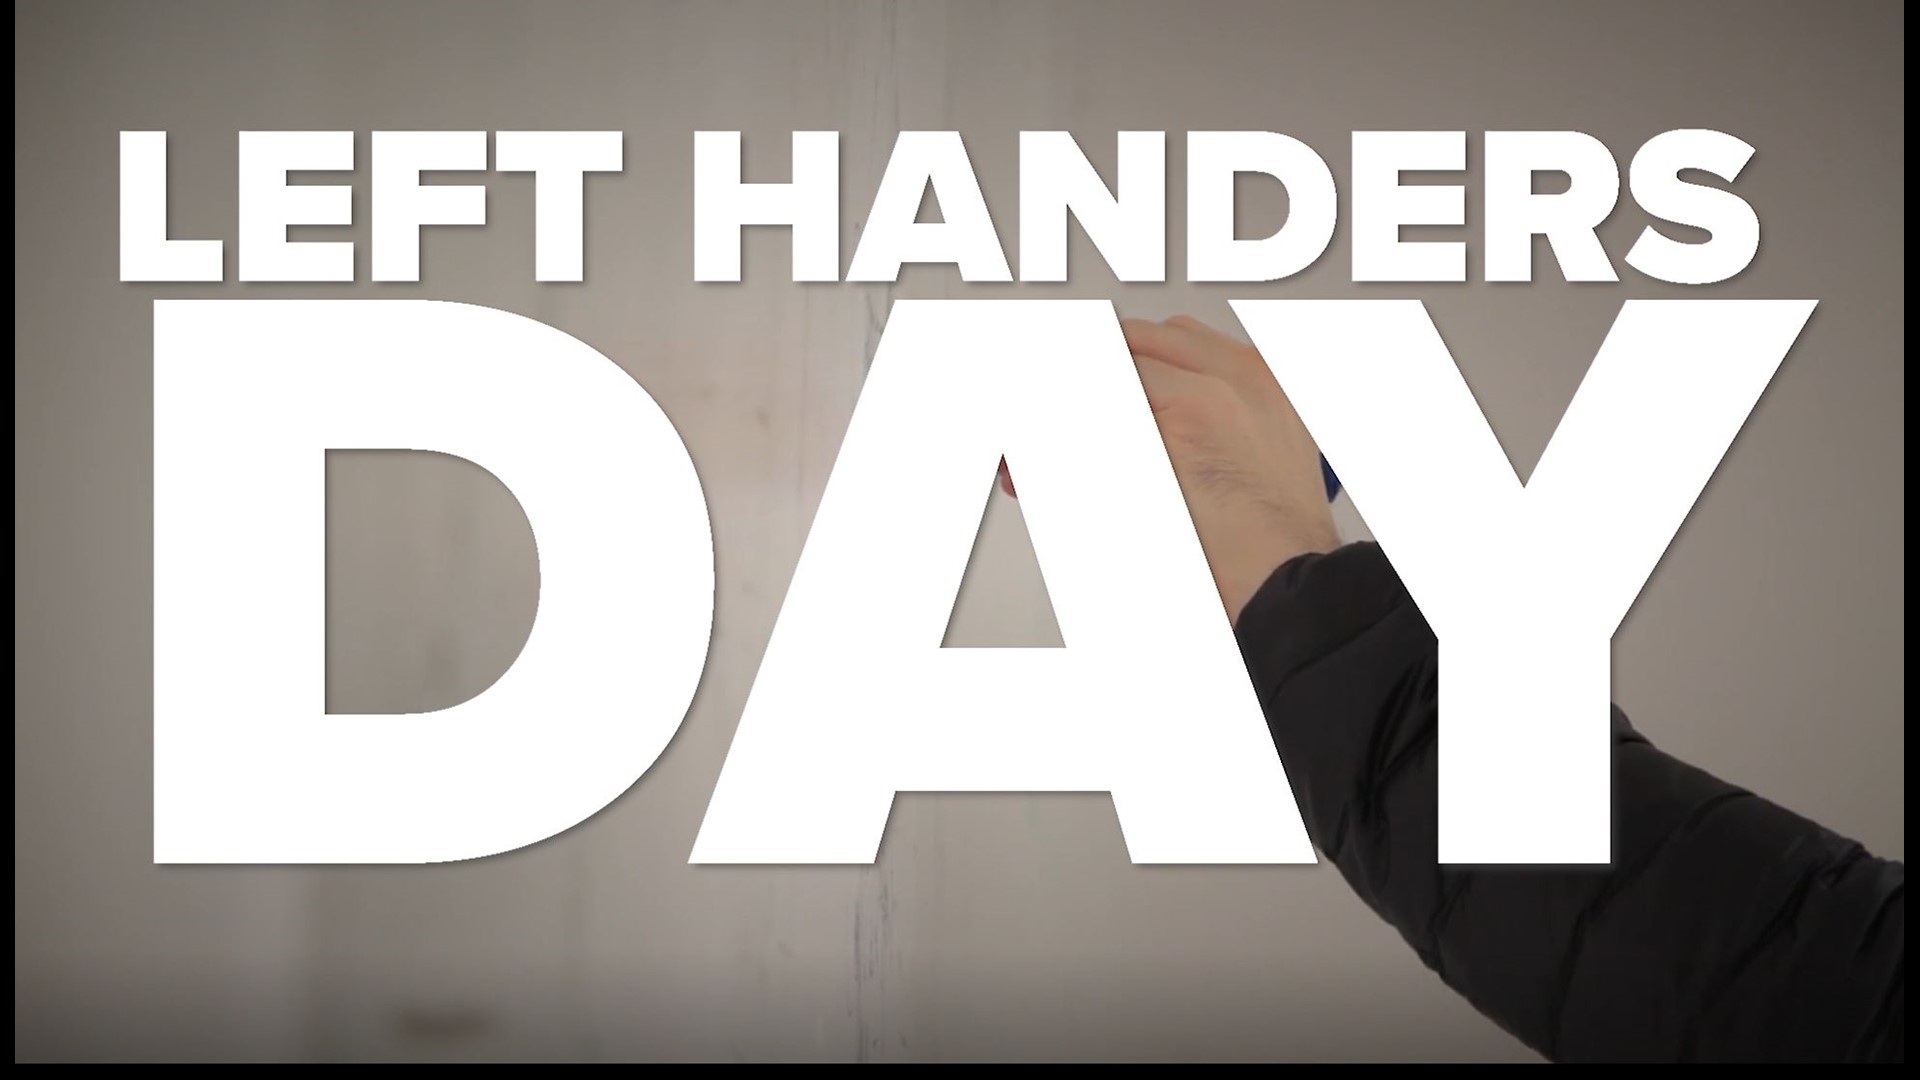 Left Handed Facts - Being left-handed